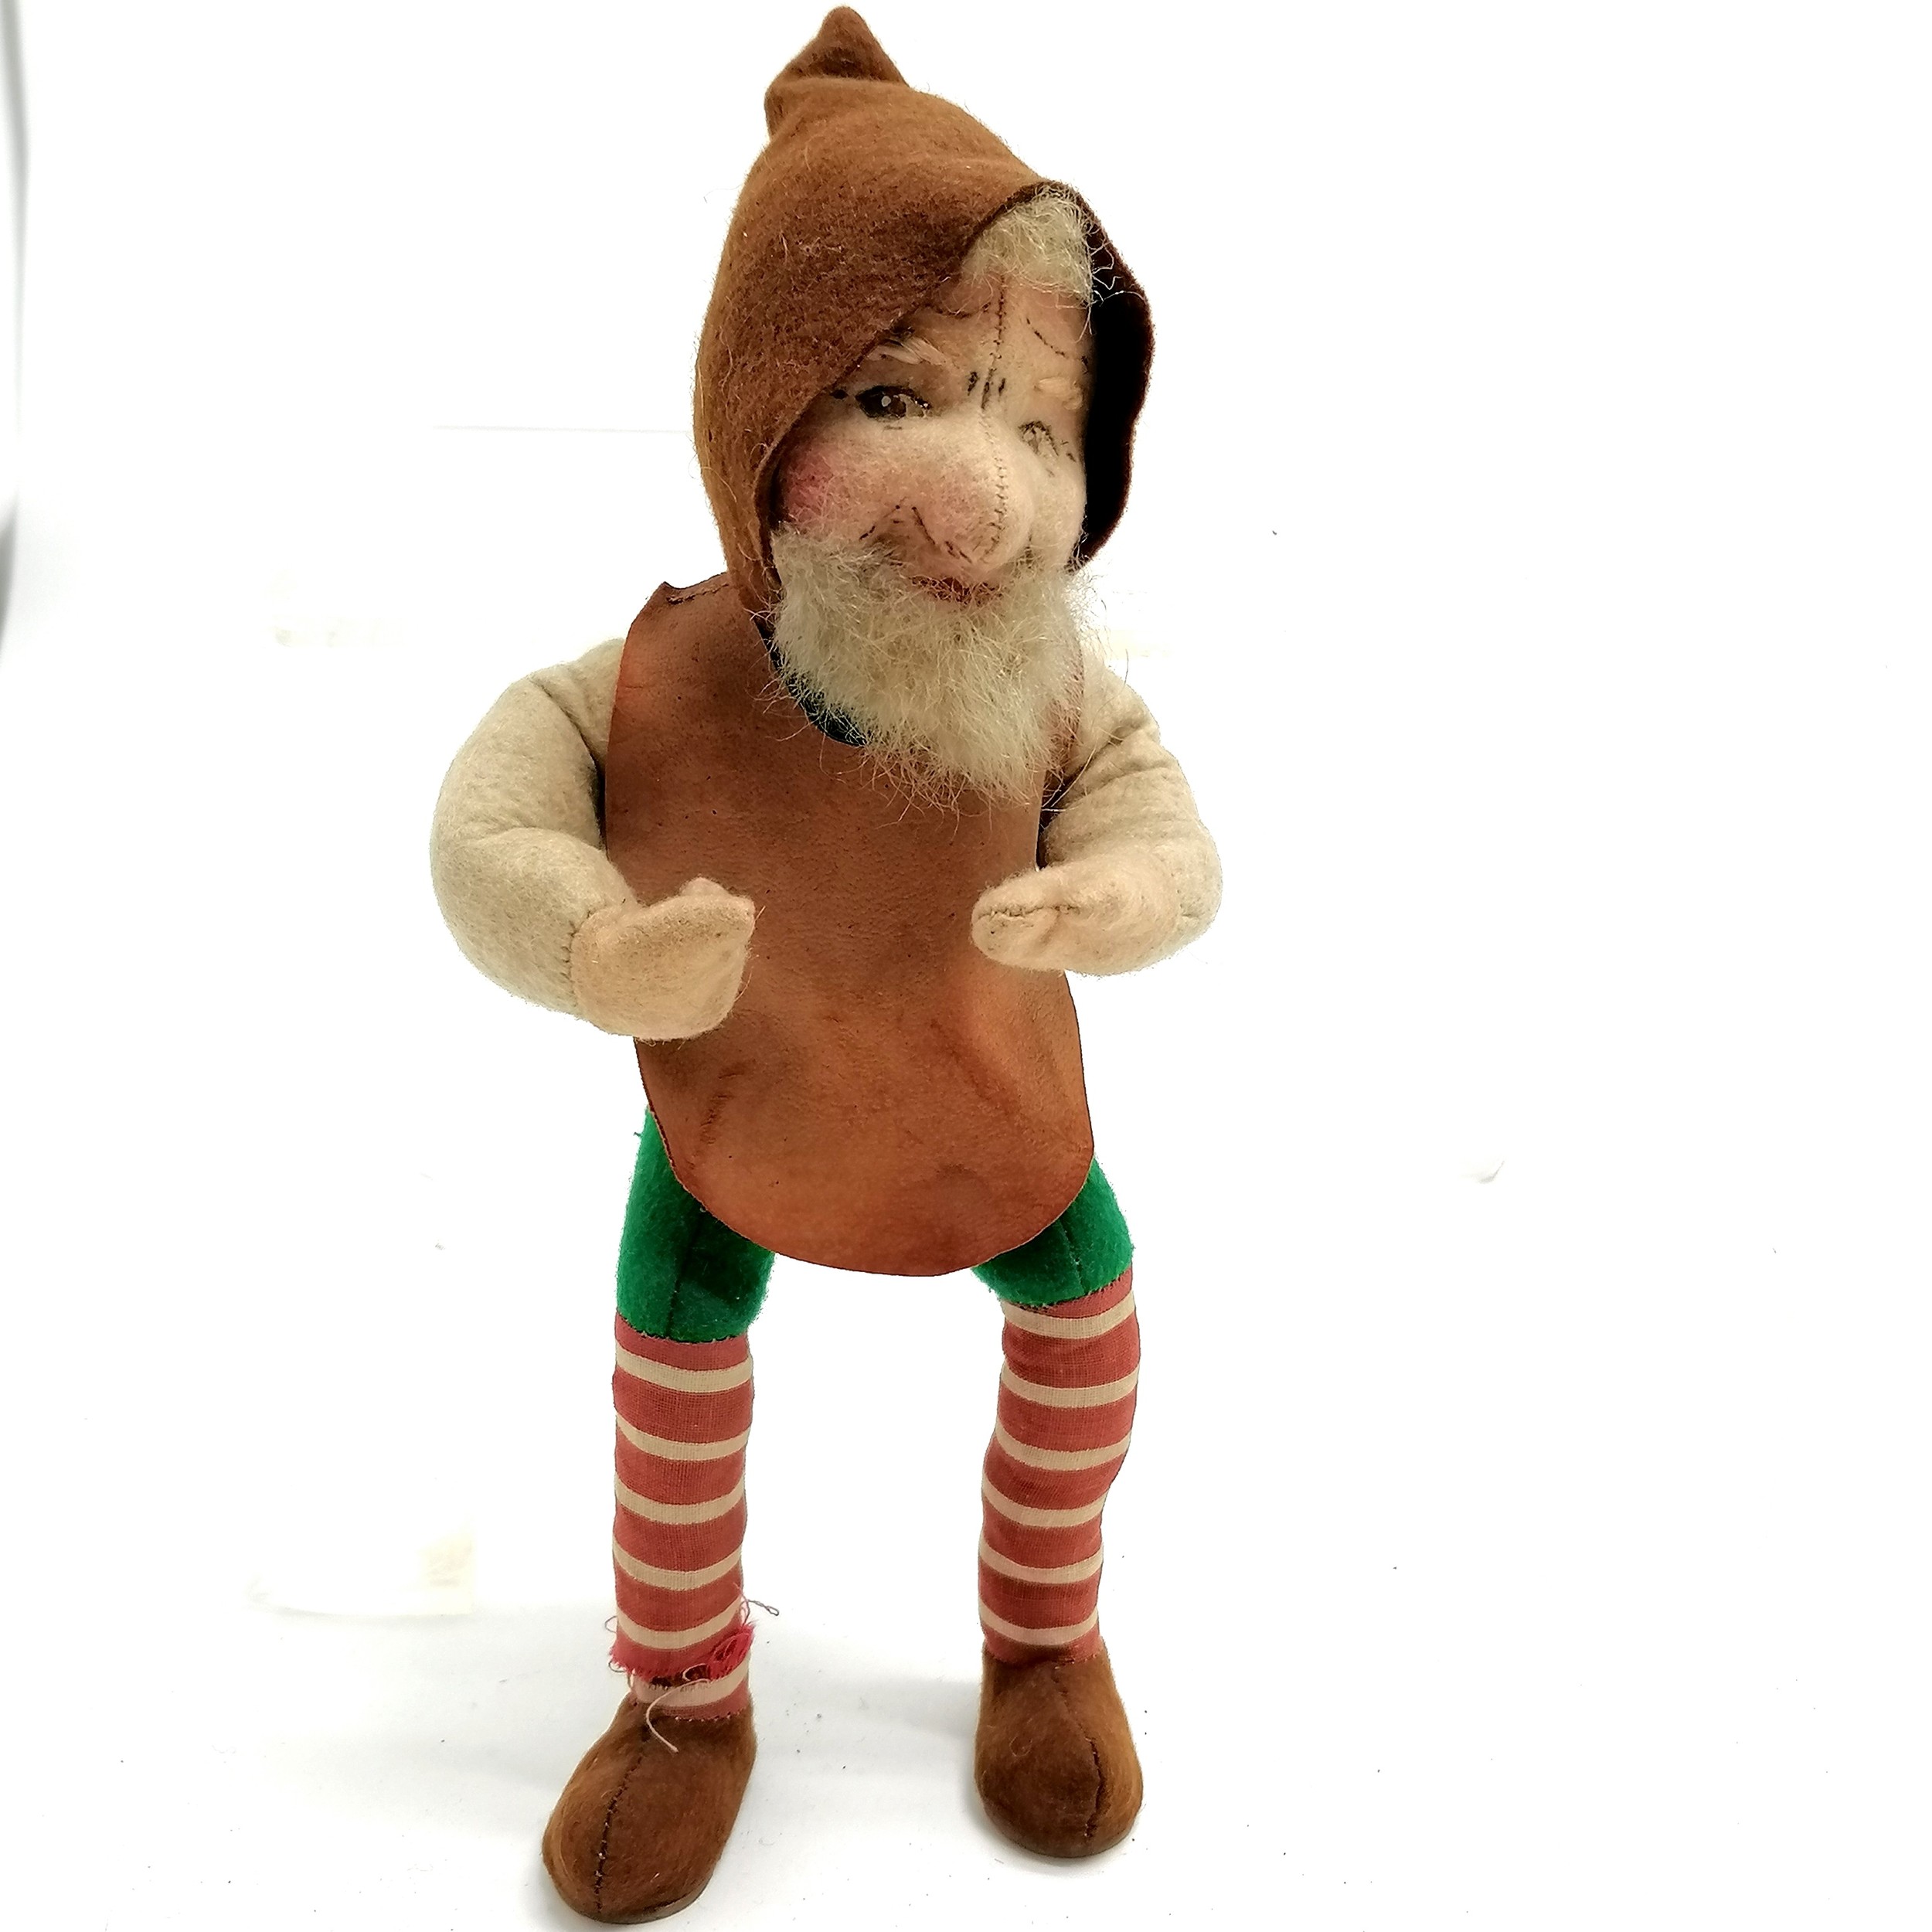 Vintage Kersa German felt and straw knome figure with a leather apron23cm high - 1 foot has come